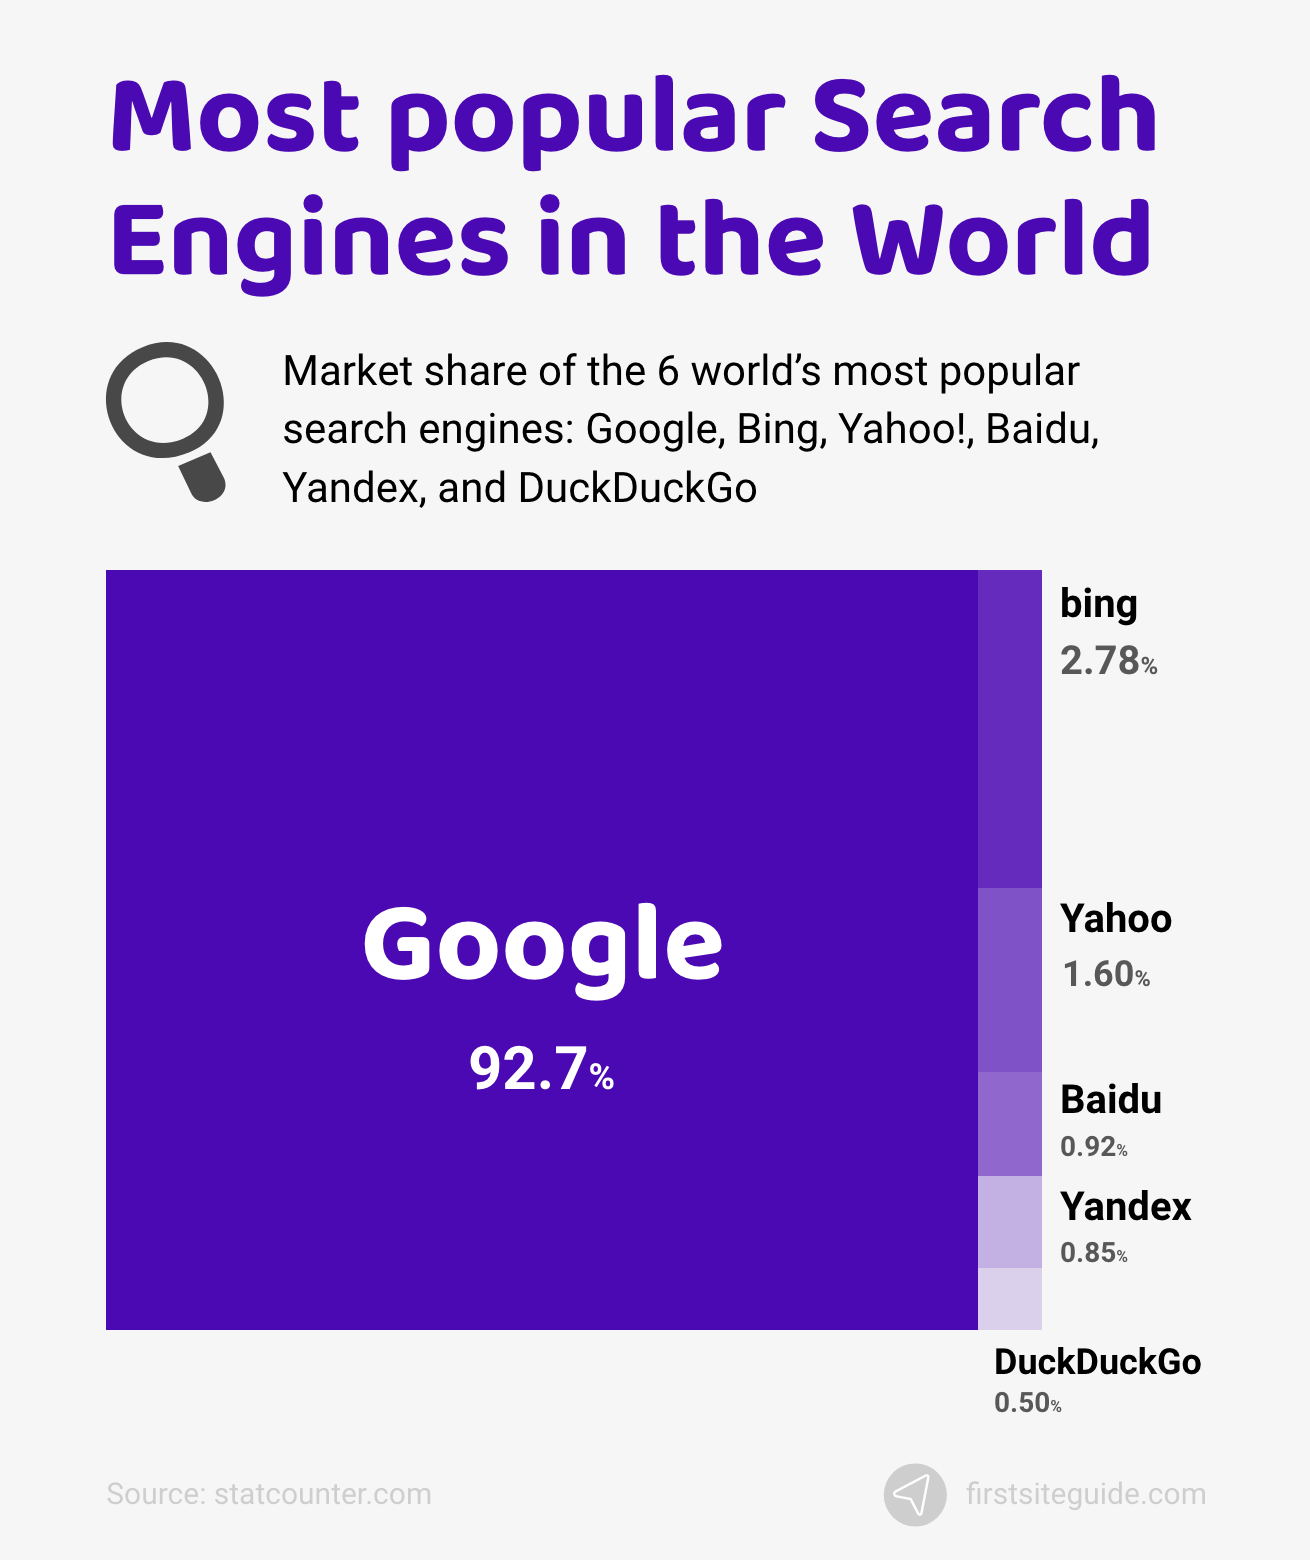 Most popular Search Engines in the World